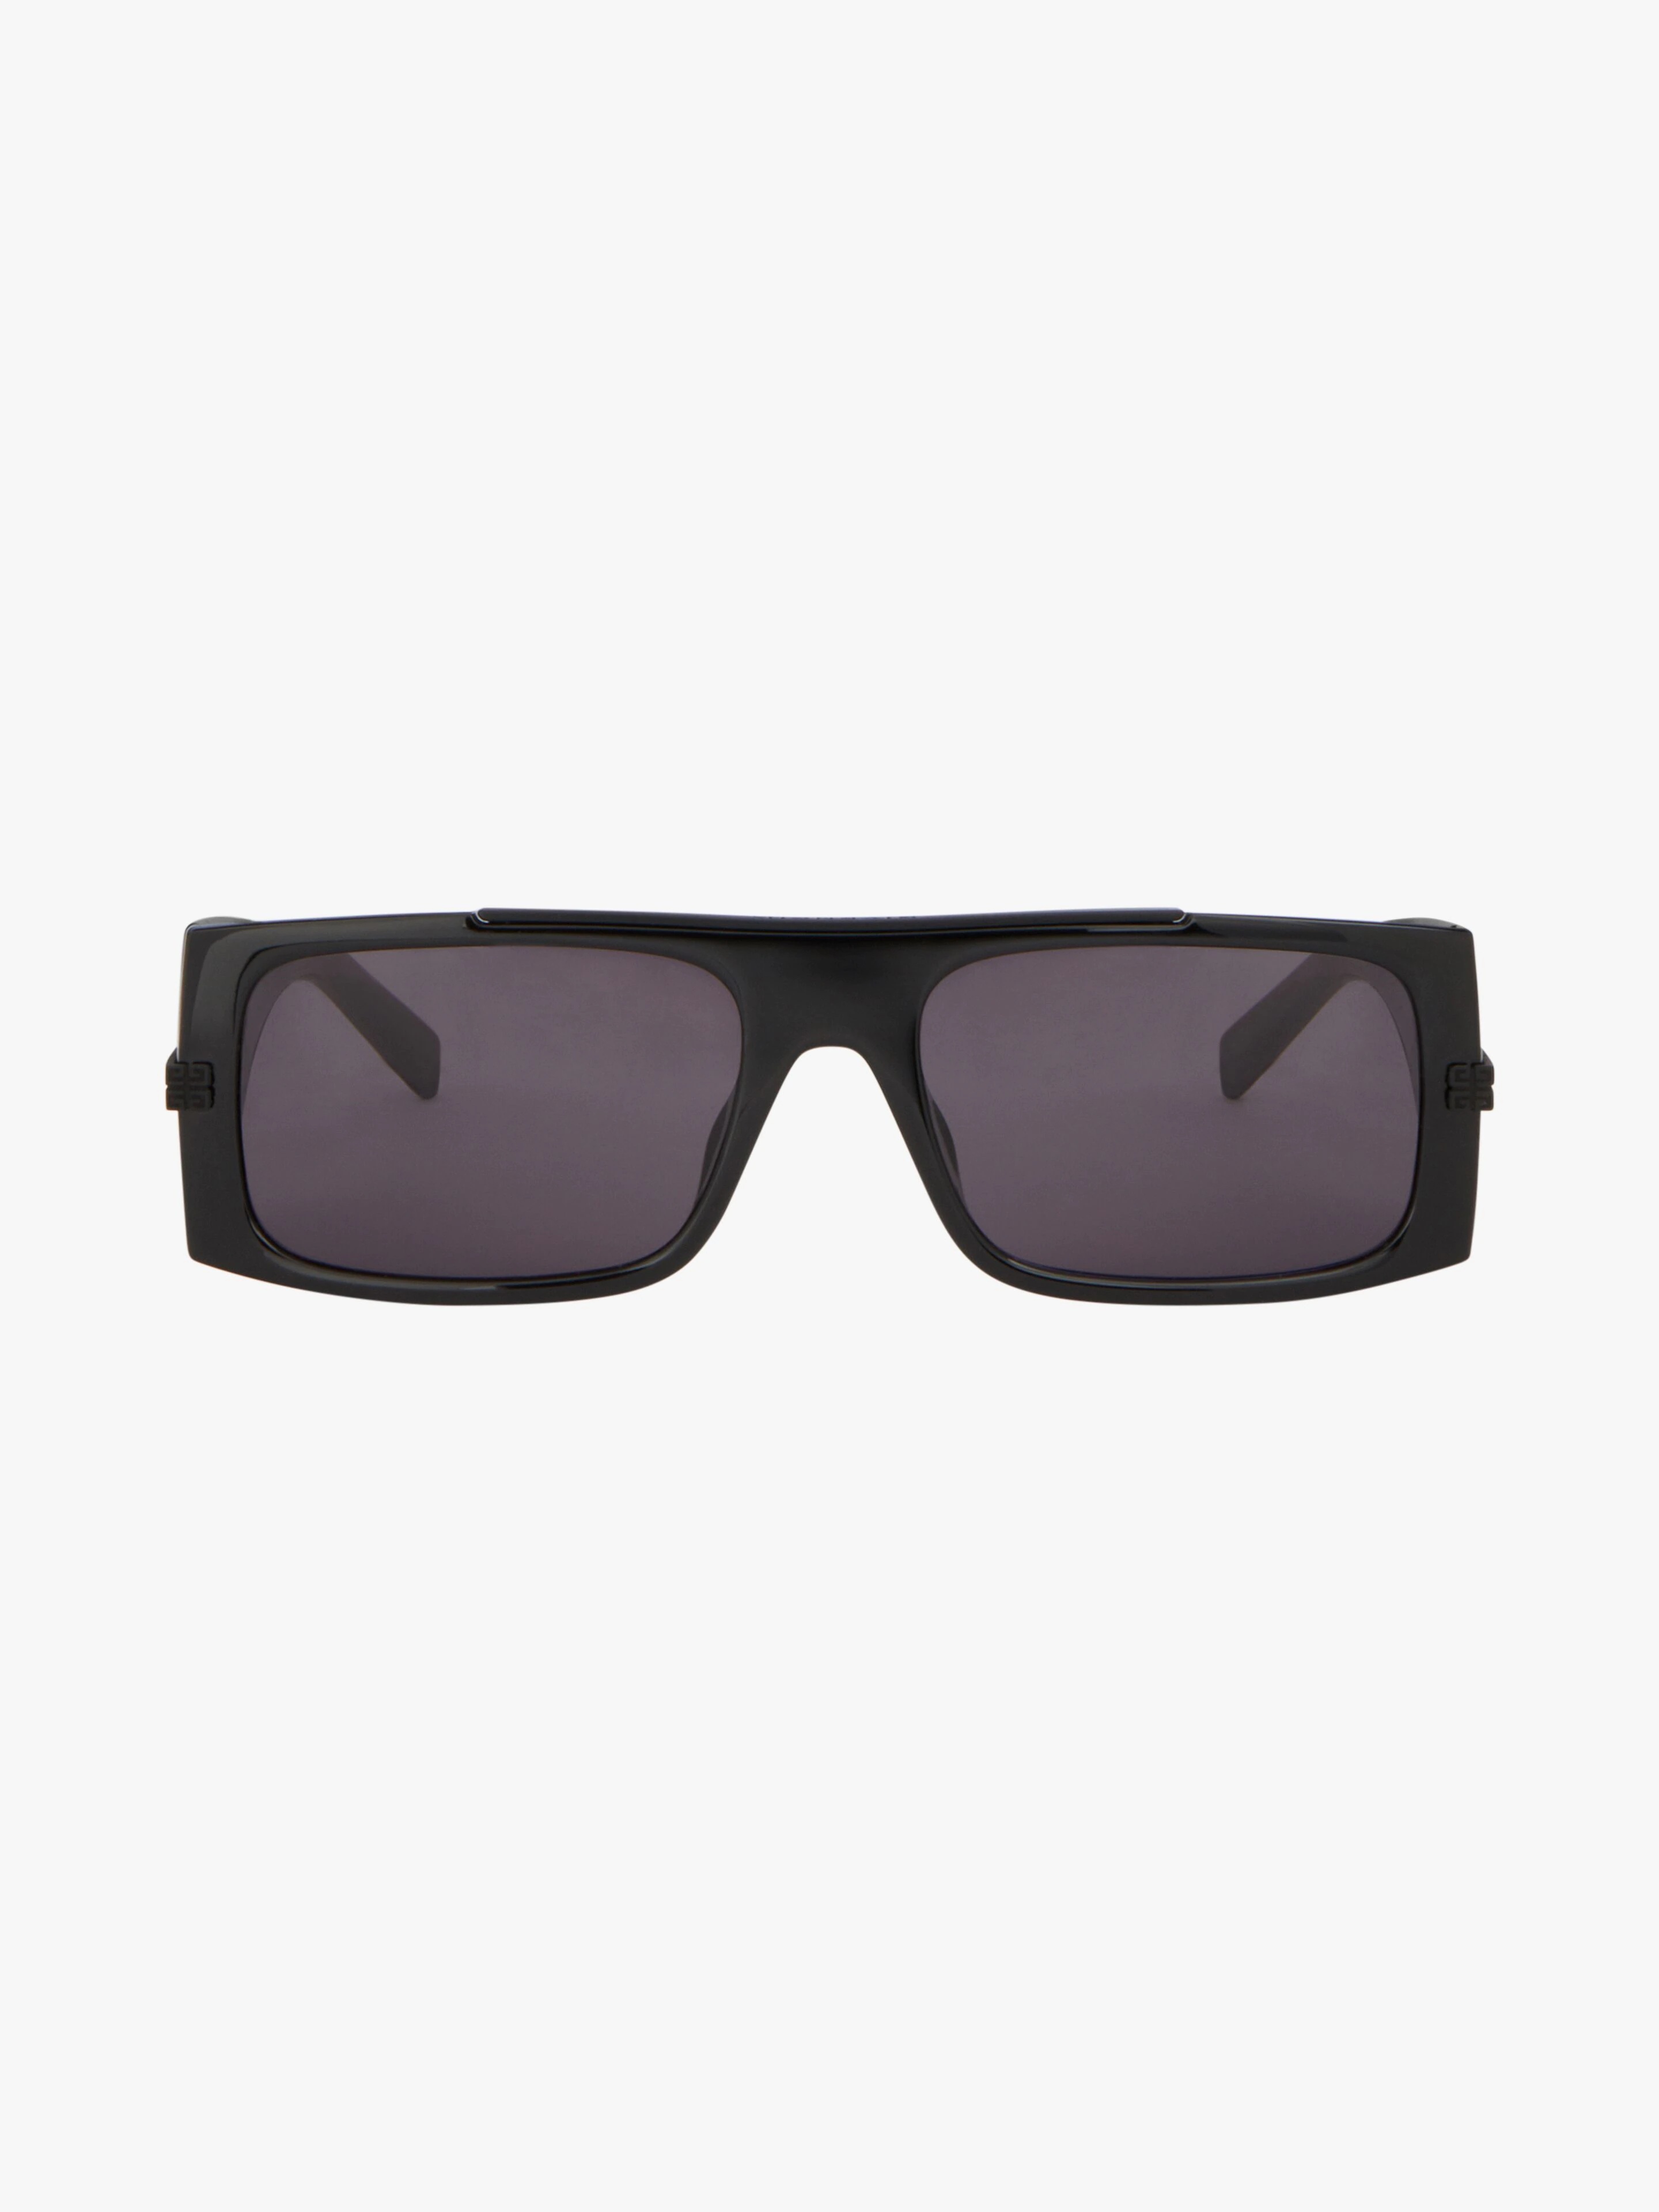 GV BAR SUNGLASSES IN INJECTED - 4